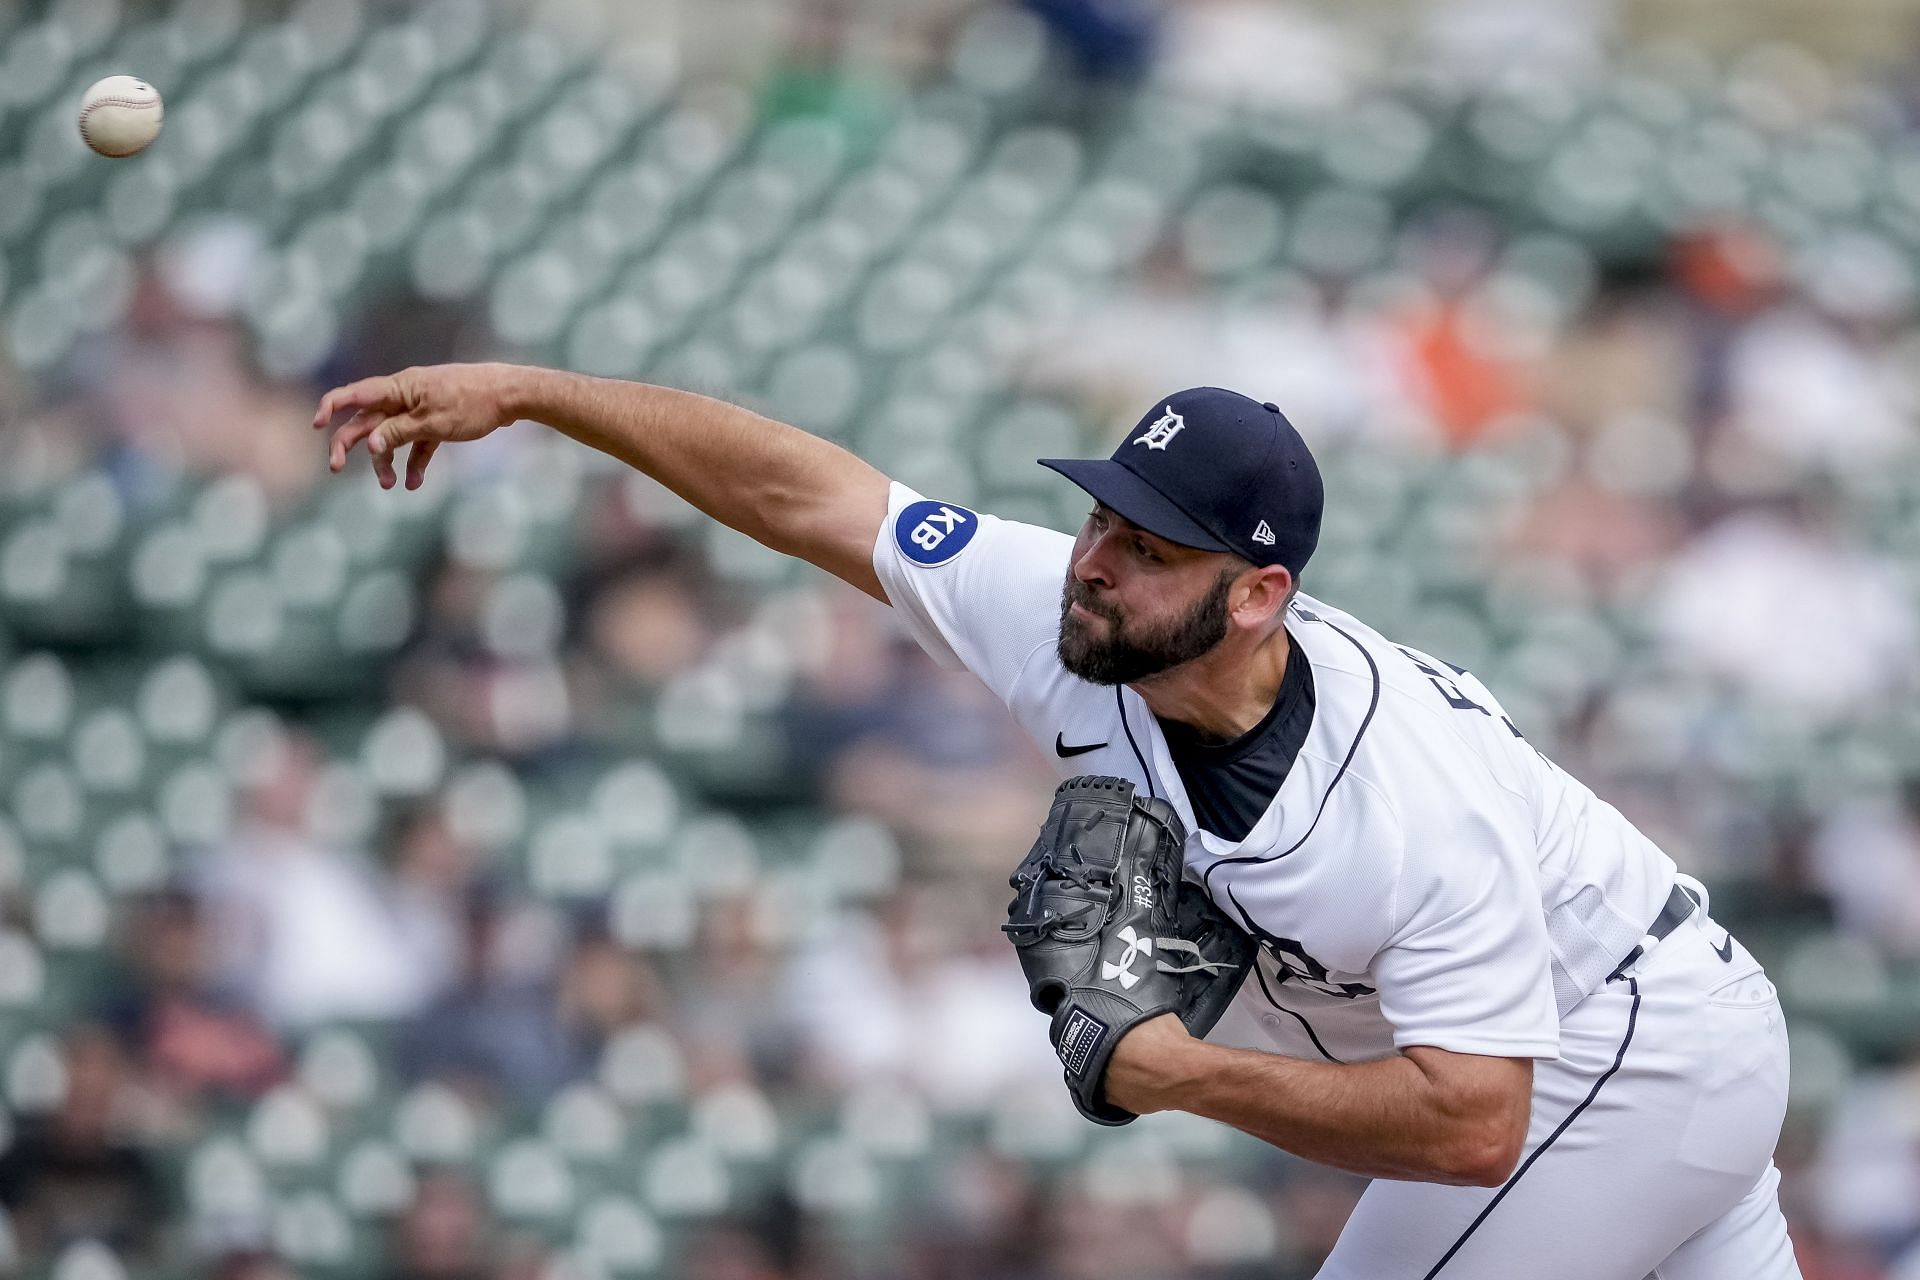 Michael Fulmer #32 of the Detroit Tigers delivers a pitch against the Colorado Rockies during the top of the ninth inning at Comerica Park on April 24, 2022